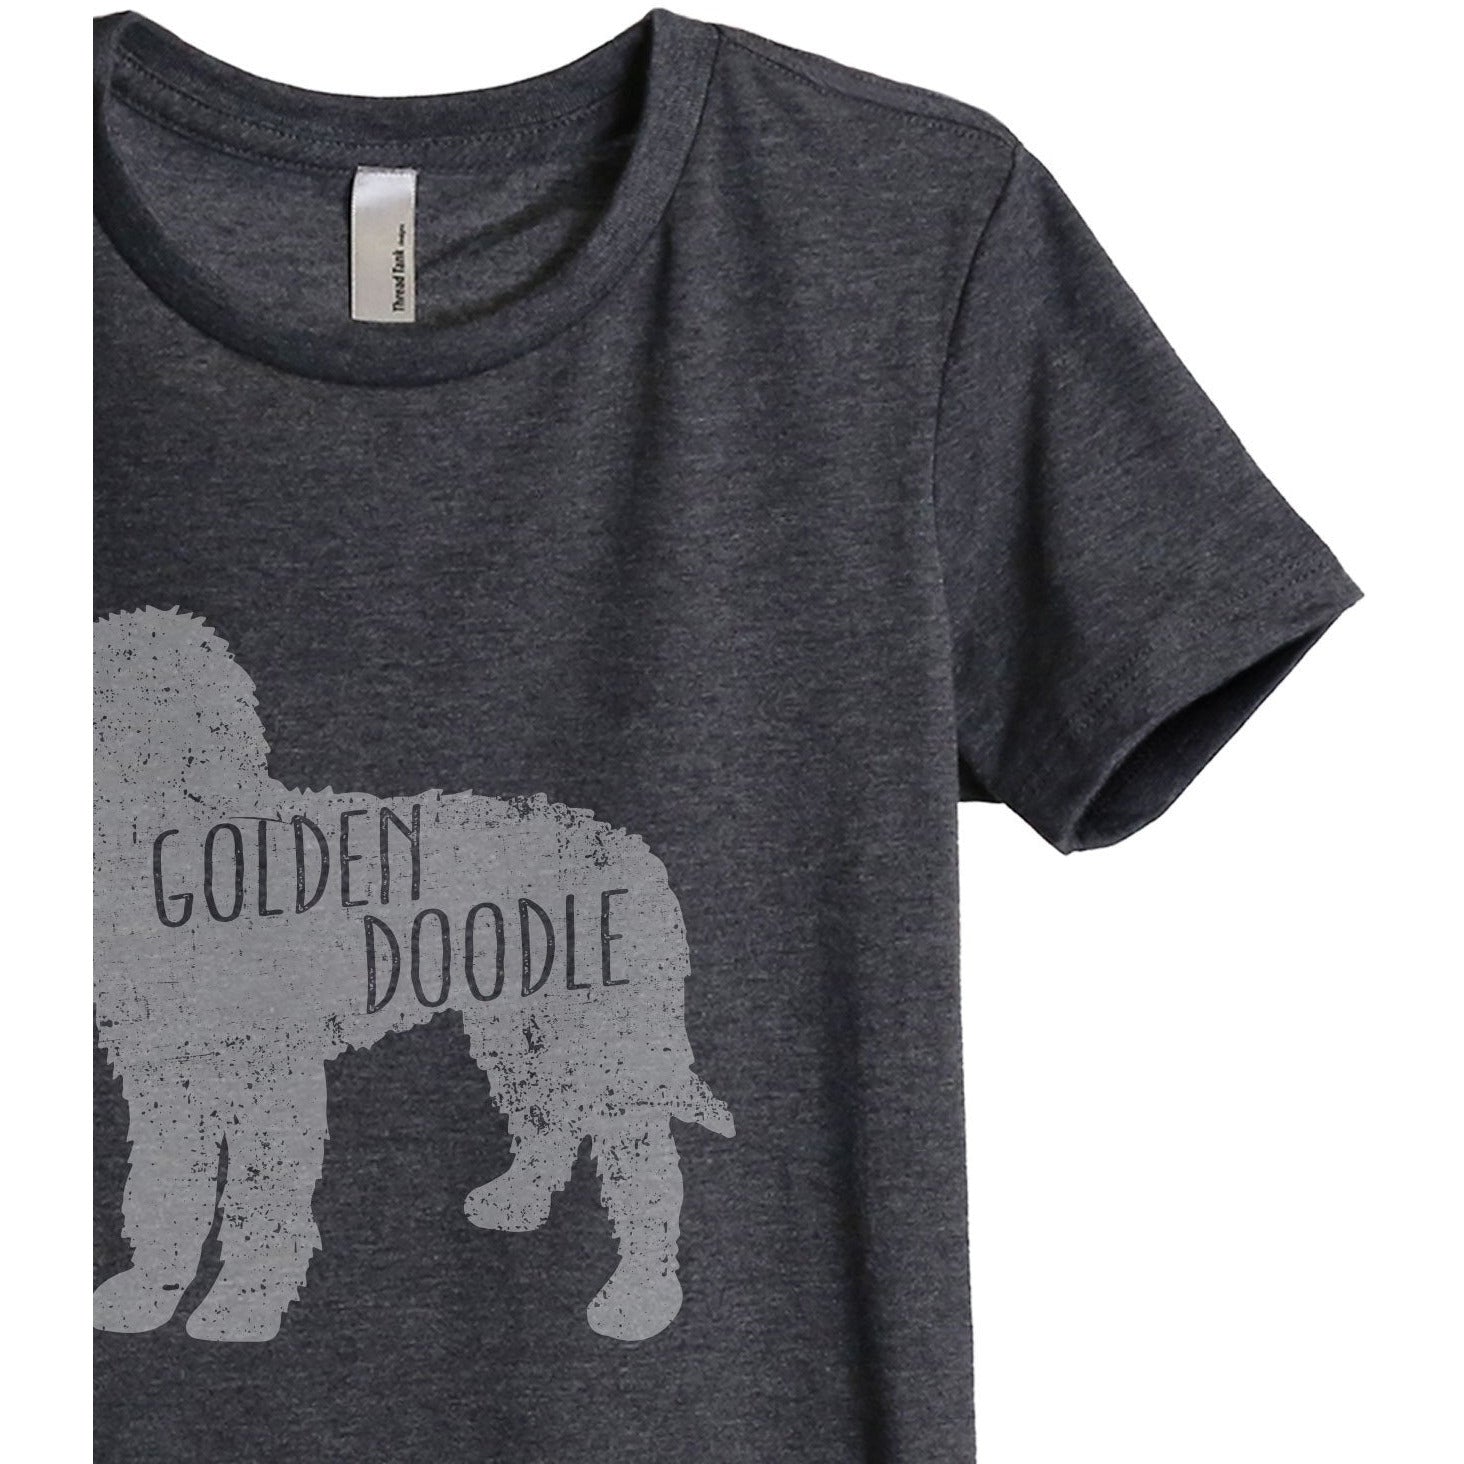 Golden Doodle Silhouette Women's Relaxed Crewneck T-Shirt Top Tee Charcoal Grey Zoom Details